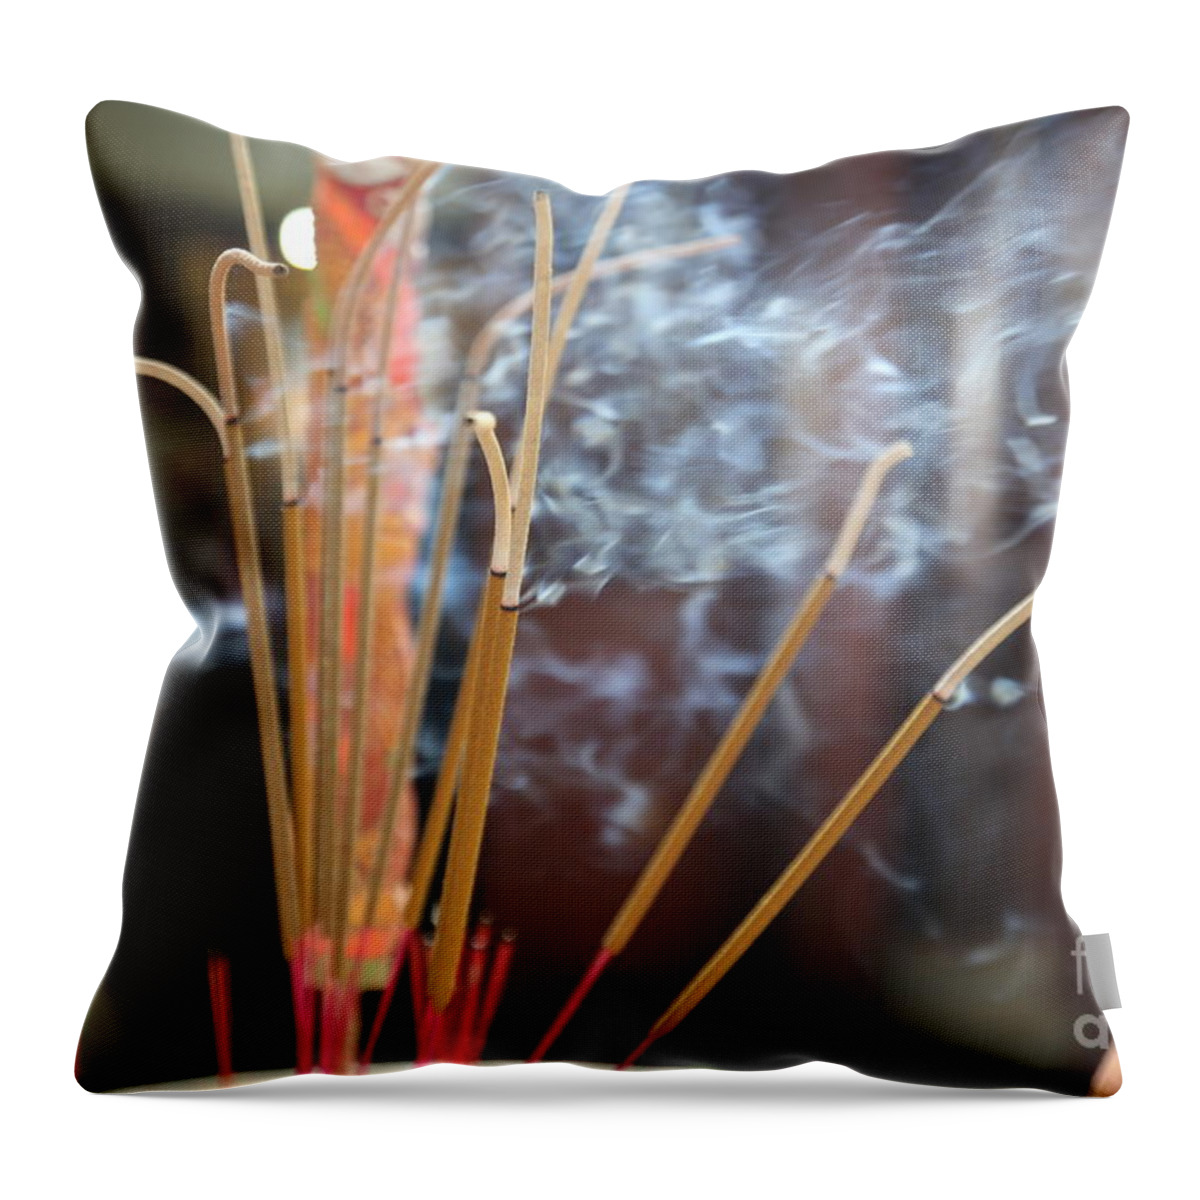 Incense Throw Pillow featuring the photograph Incense Burning Asia by Chuck Kuhn